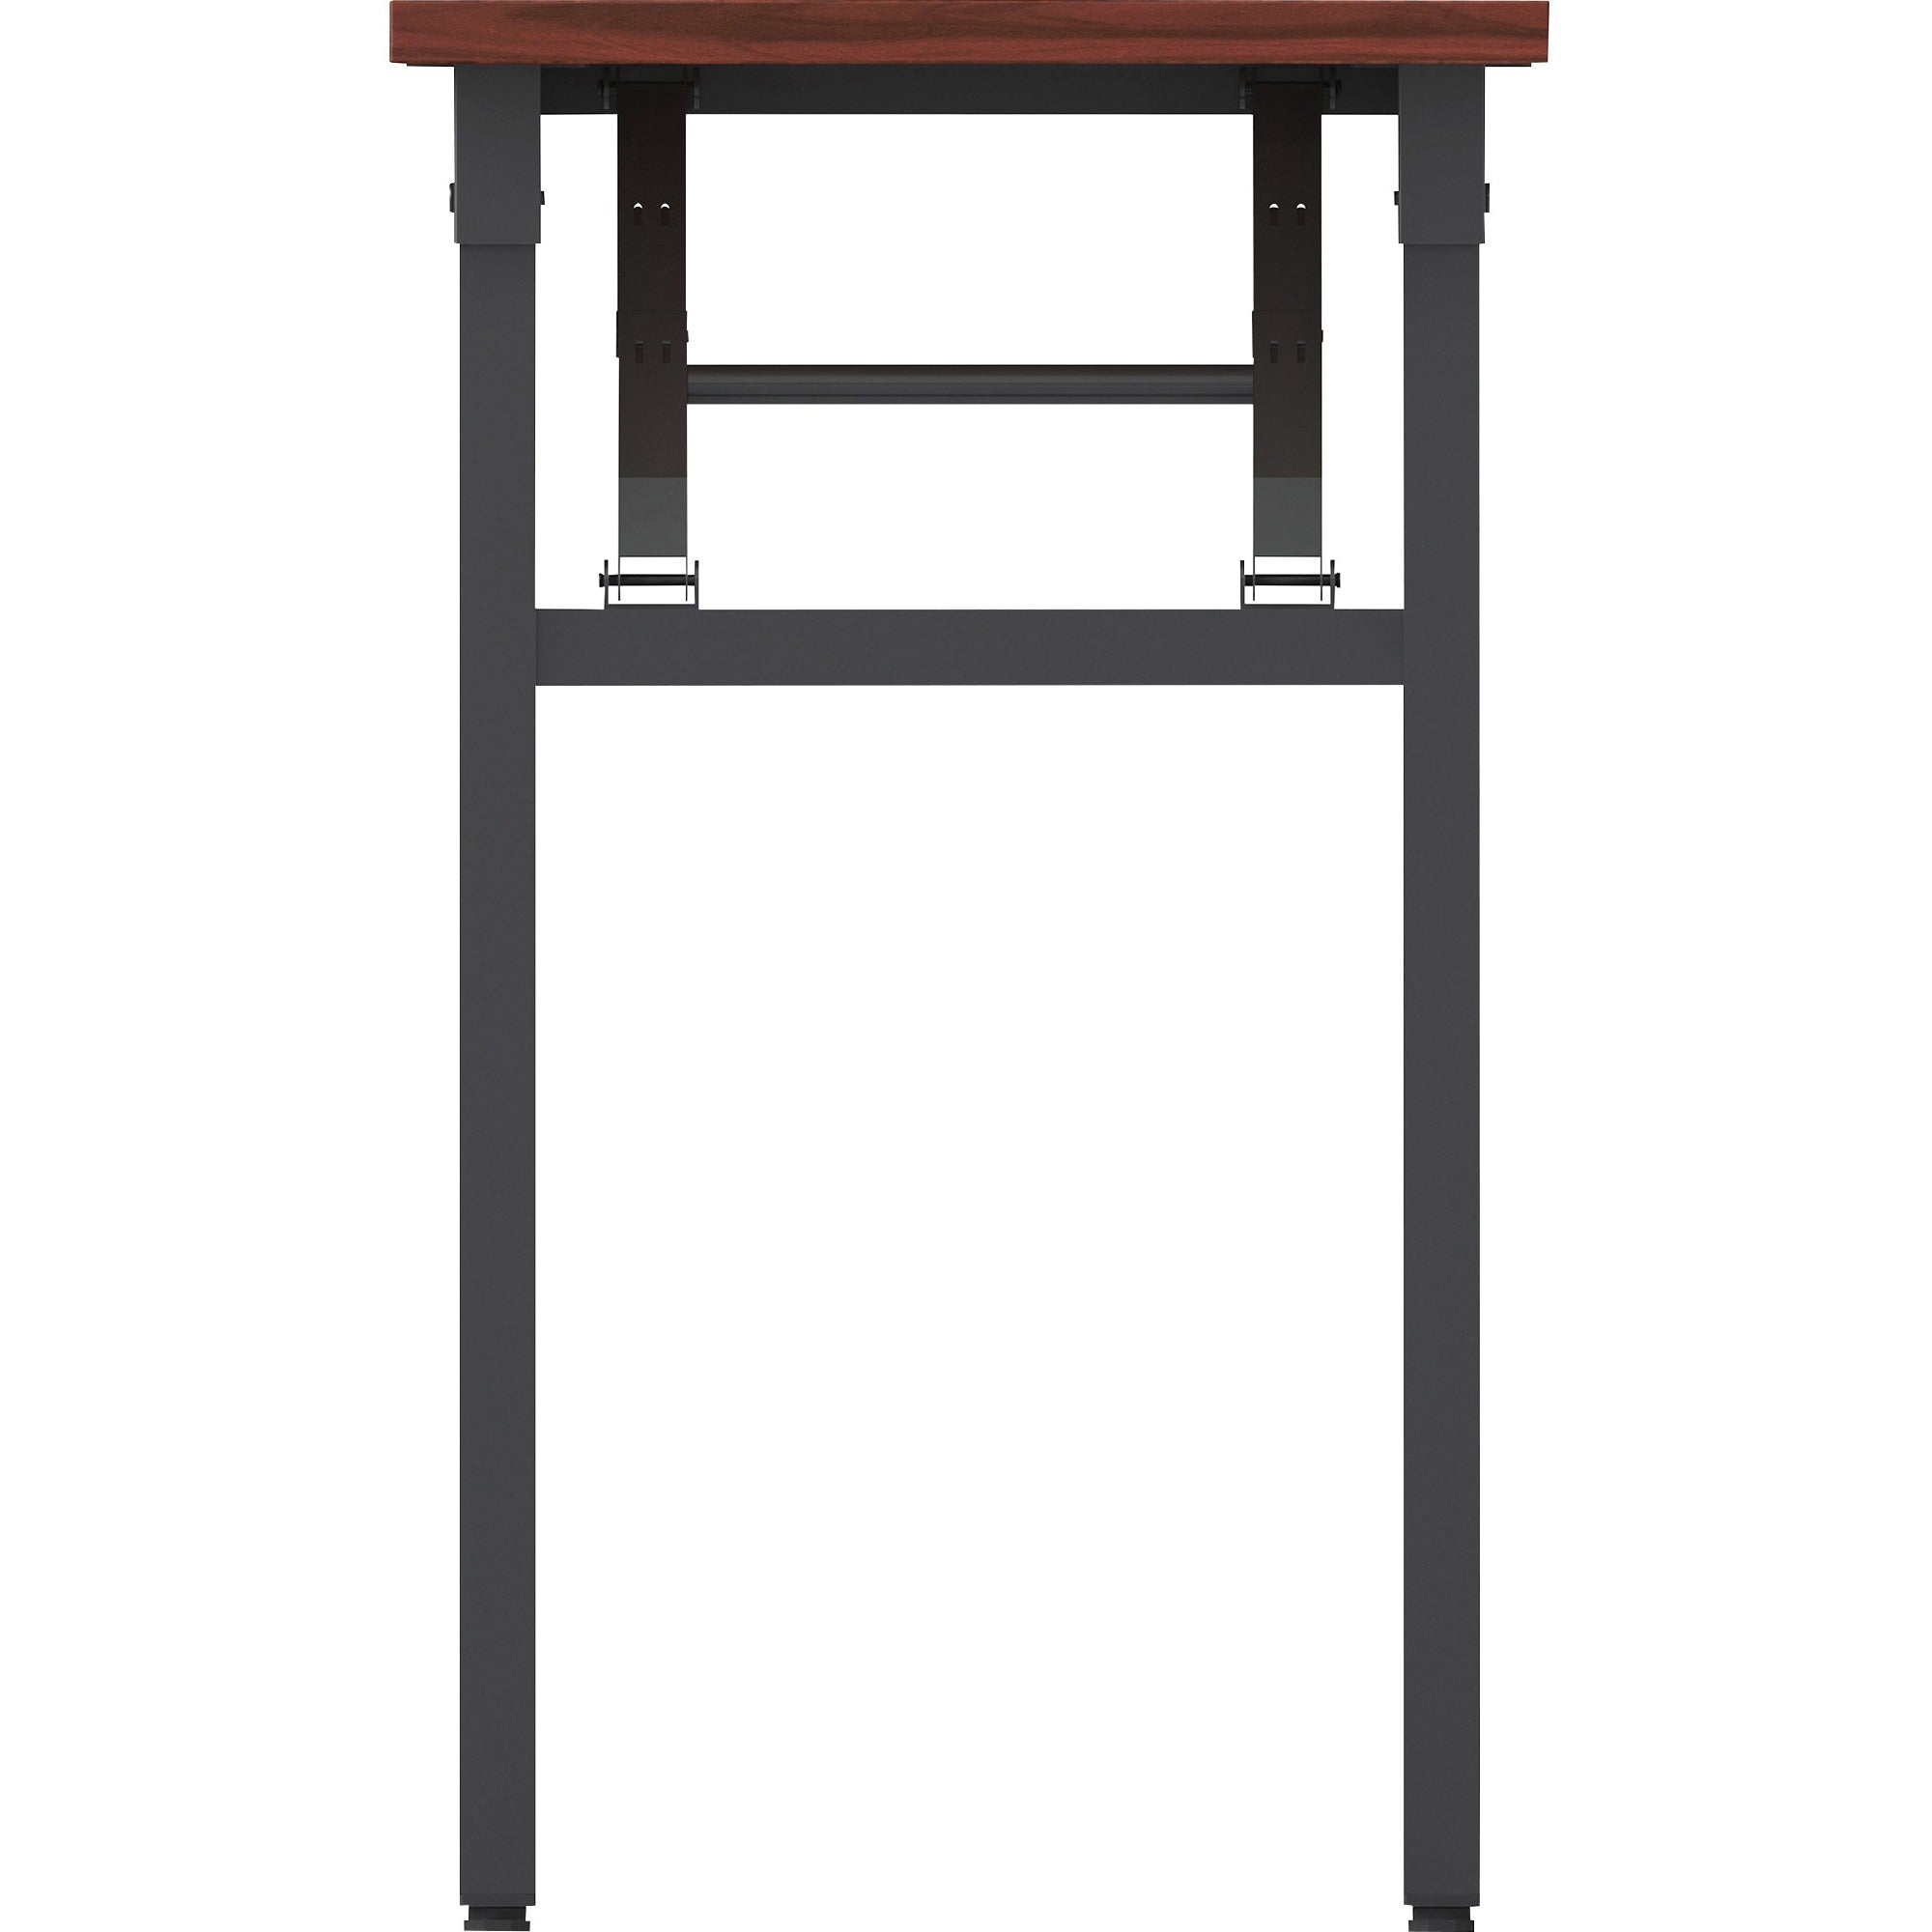 lorell-folding-training-table-for-table-topmelamine-top-x-60-table-top-width-x-18-table-top-depth-x-1-table-top-thickness-30-height-assembly-required-mahogany-1-each_llr60747 - 5